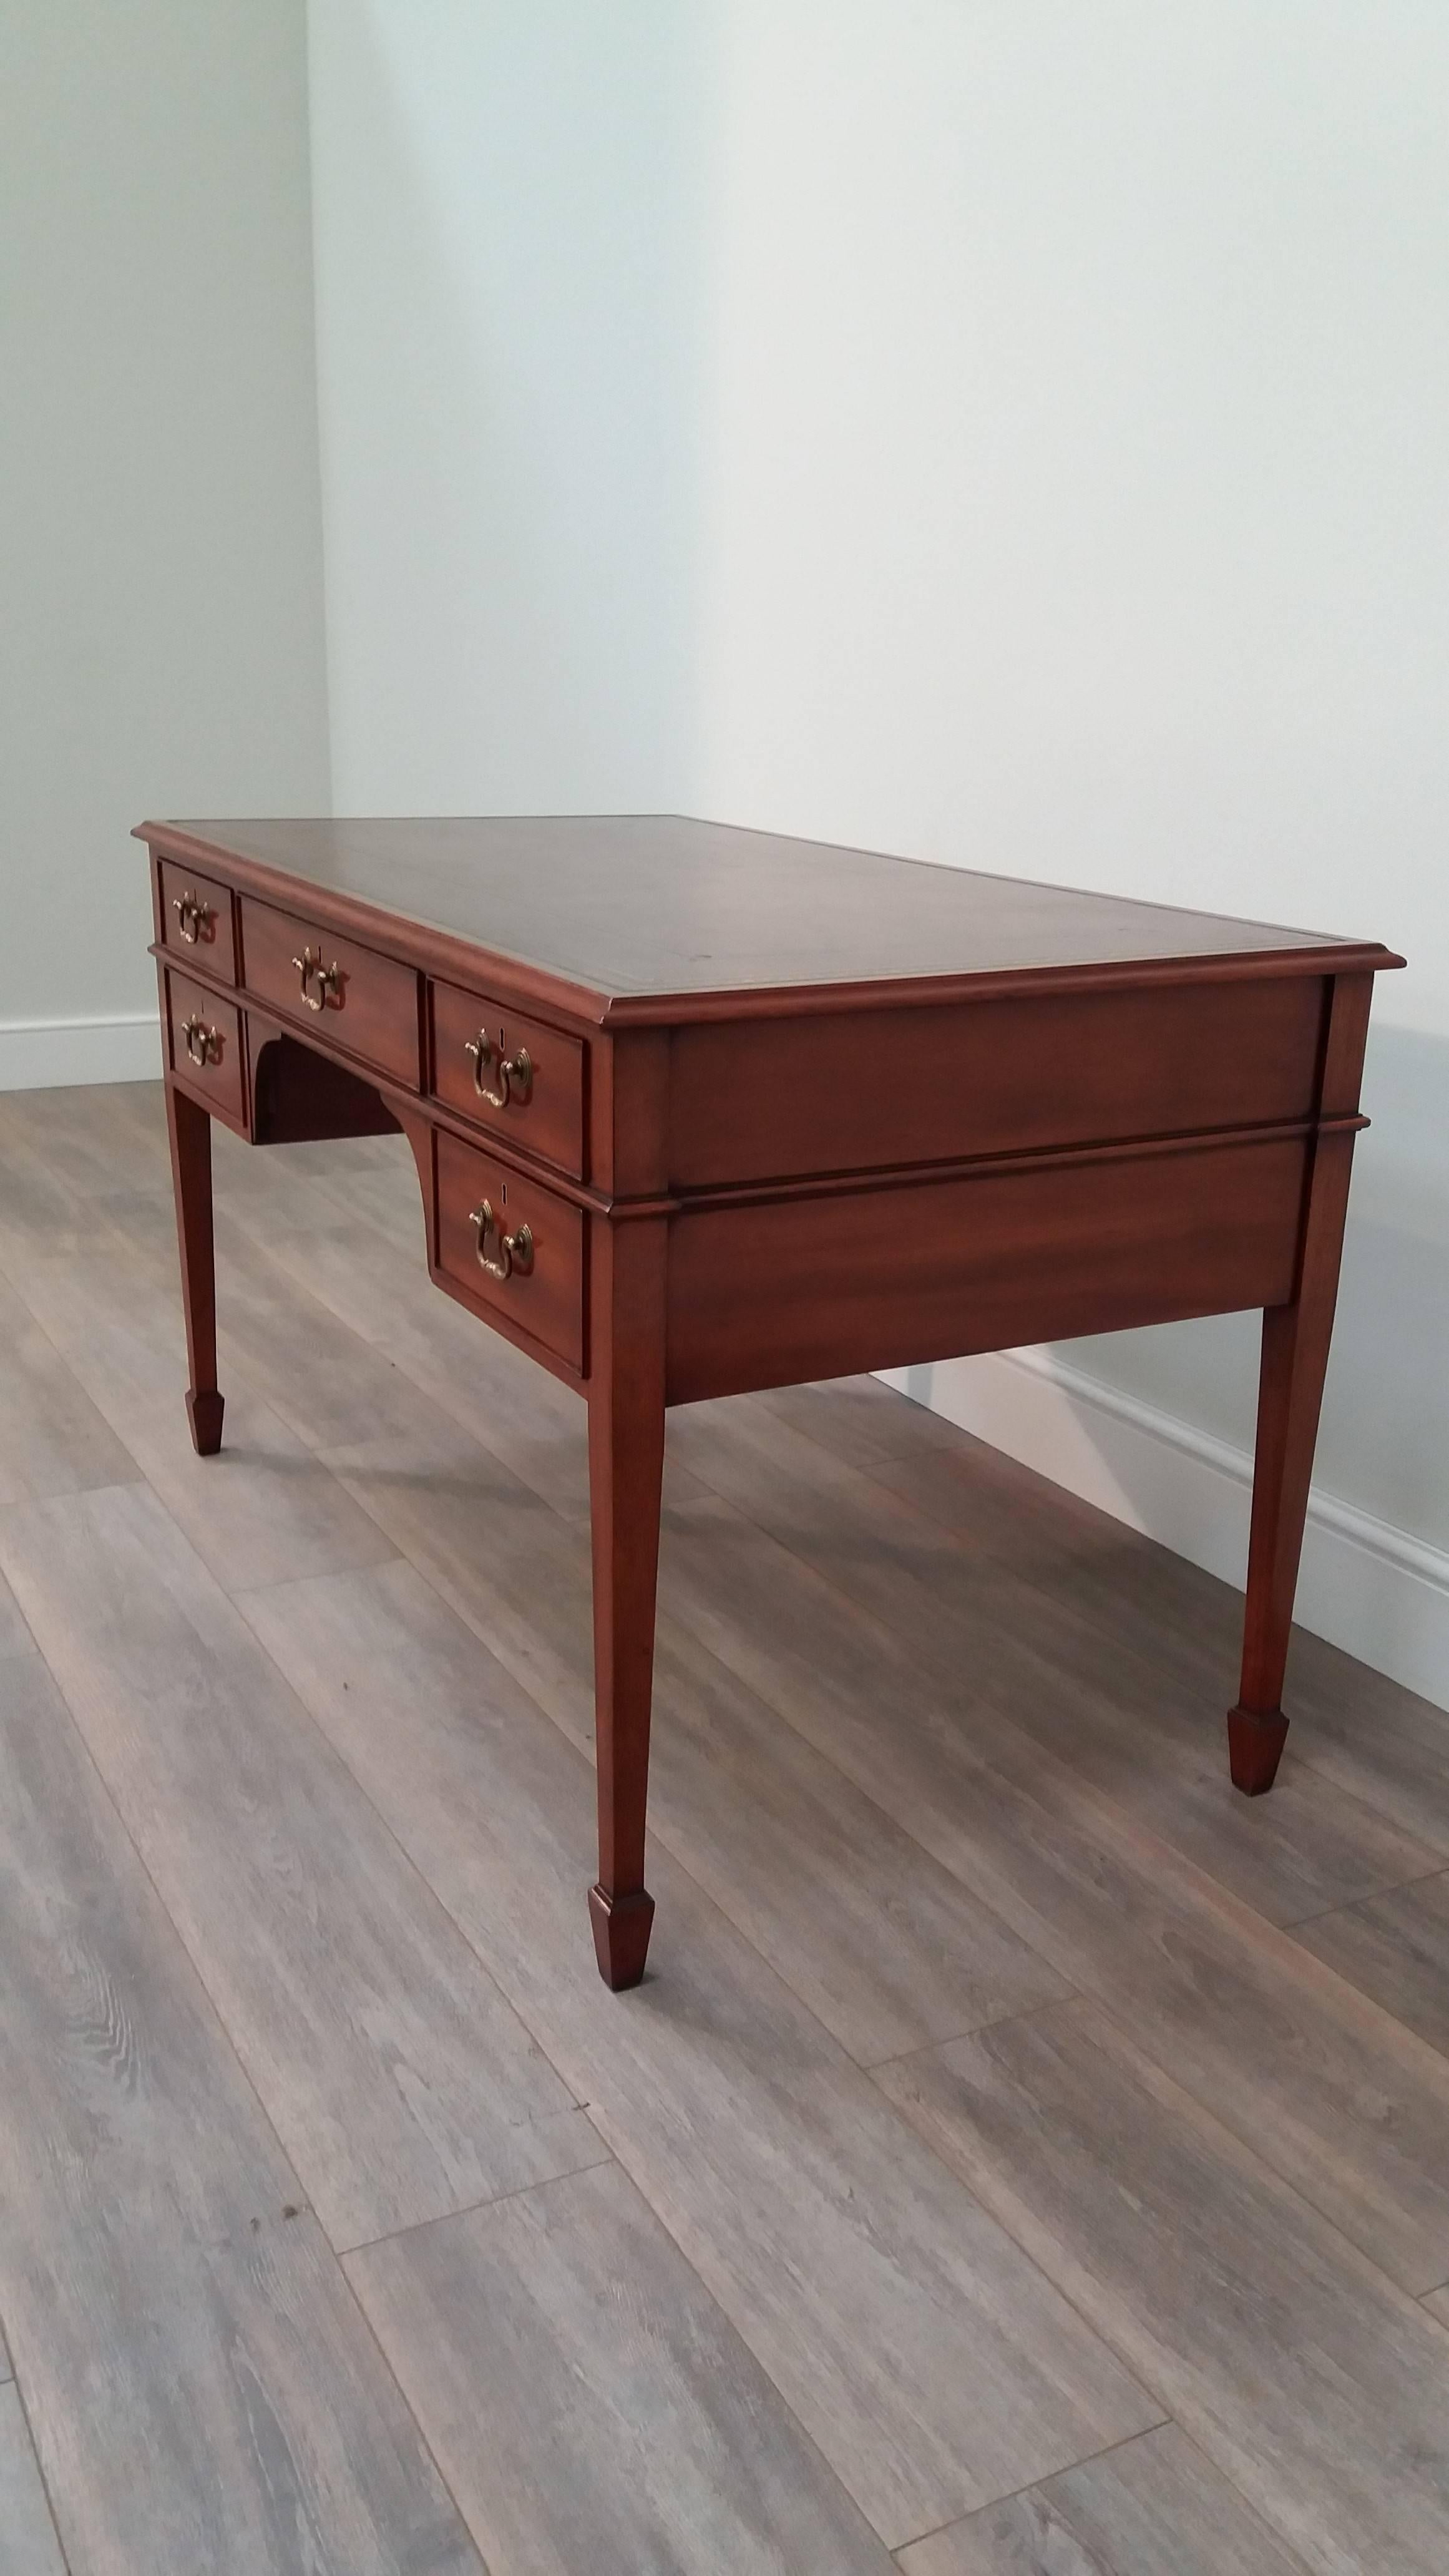 Sheraton Style Mahogany Five-Drawer Kneehole Writing Table In Excellent Condition For Sale In London, GB